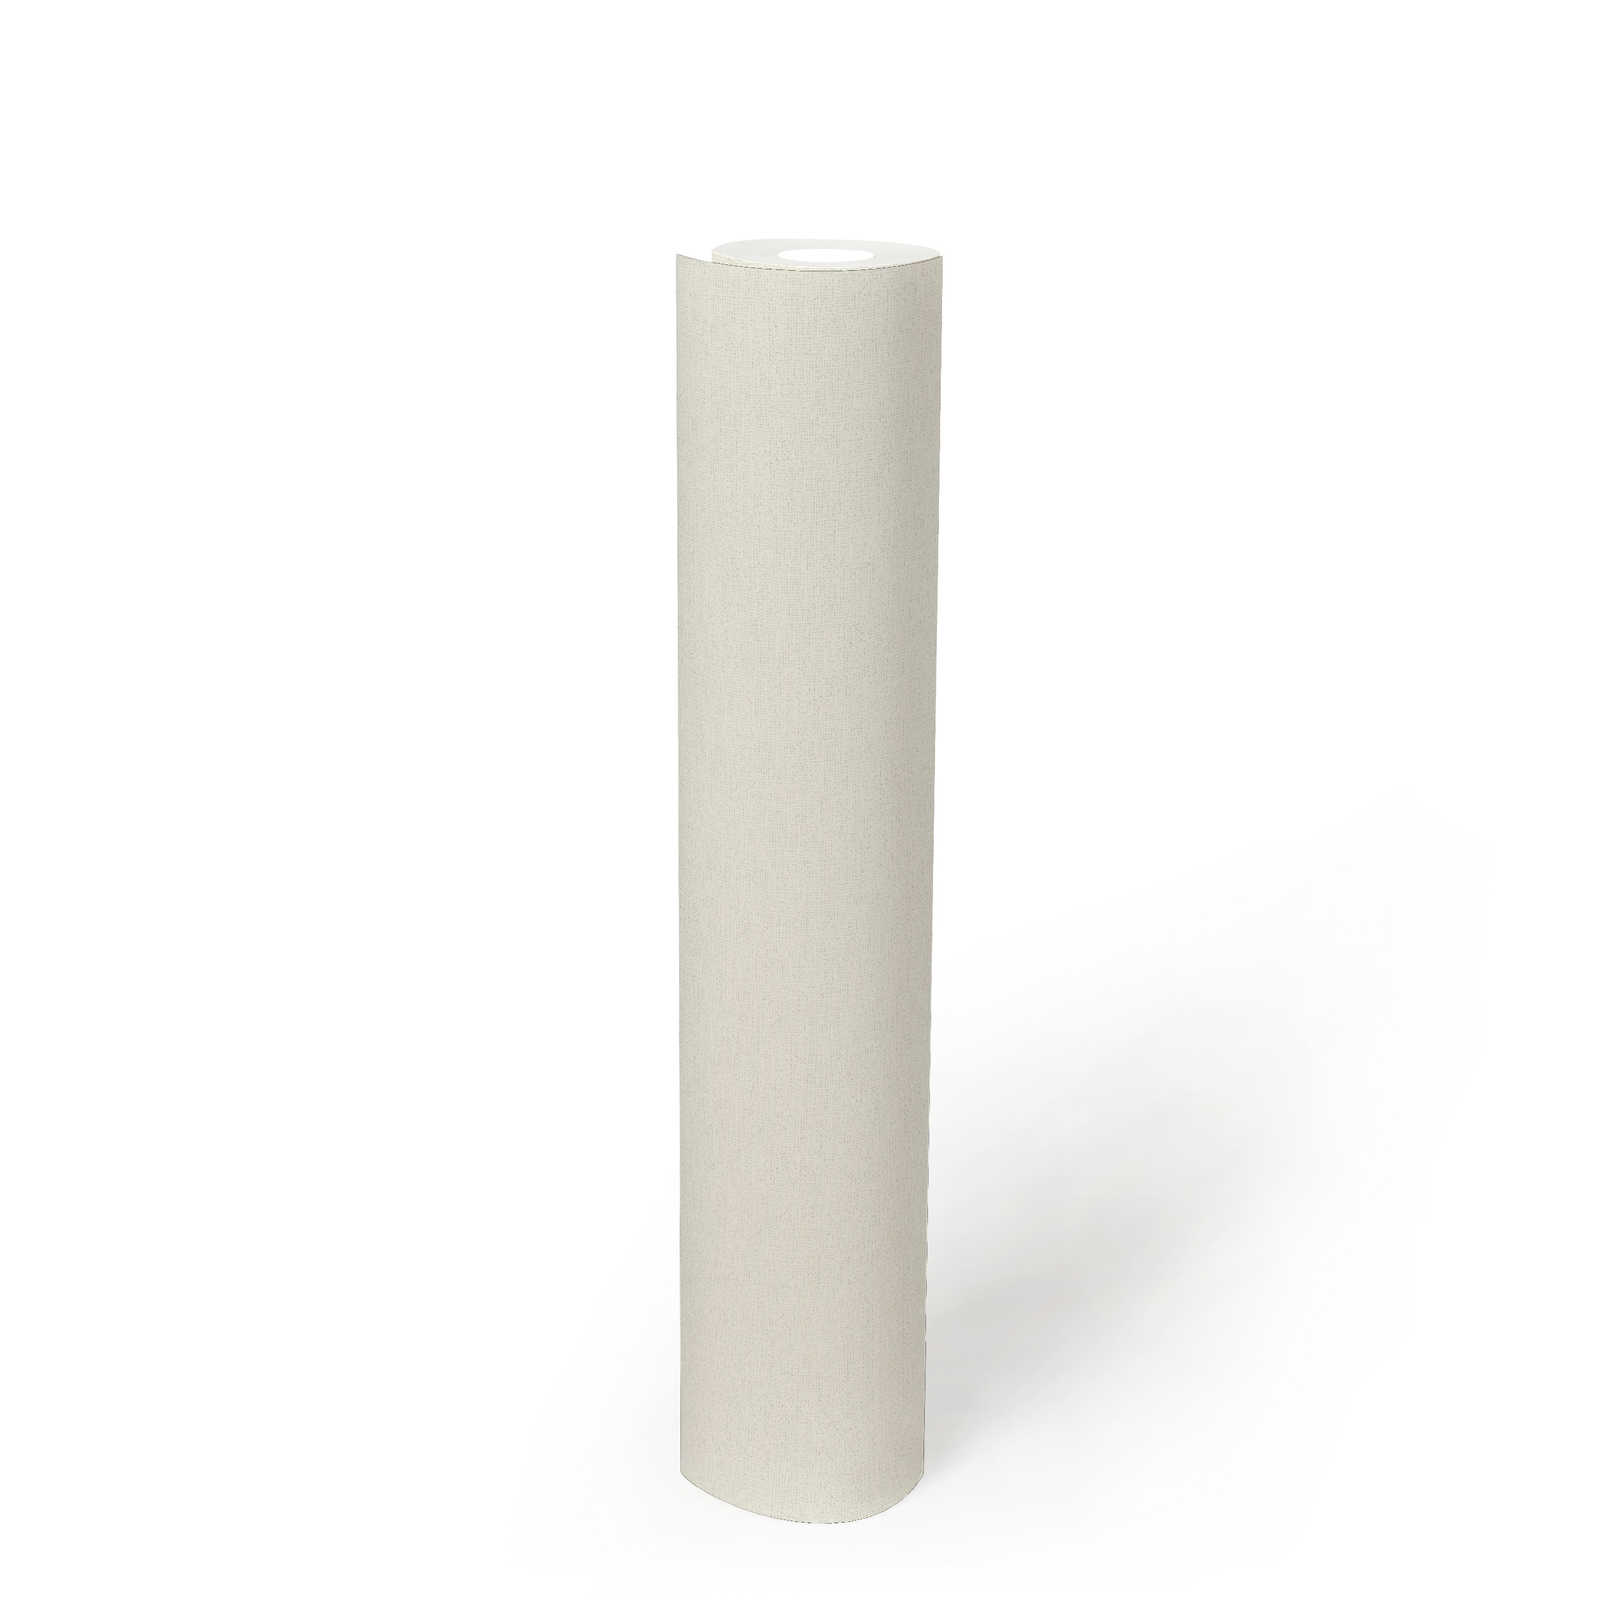             Plain wallpaper cream-white from MICHASLKY with textile structure
        